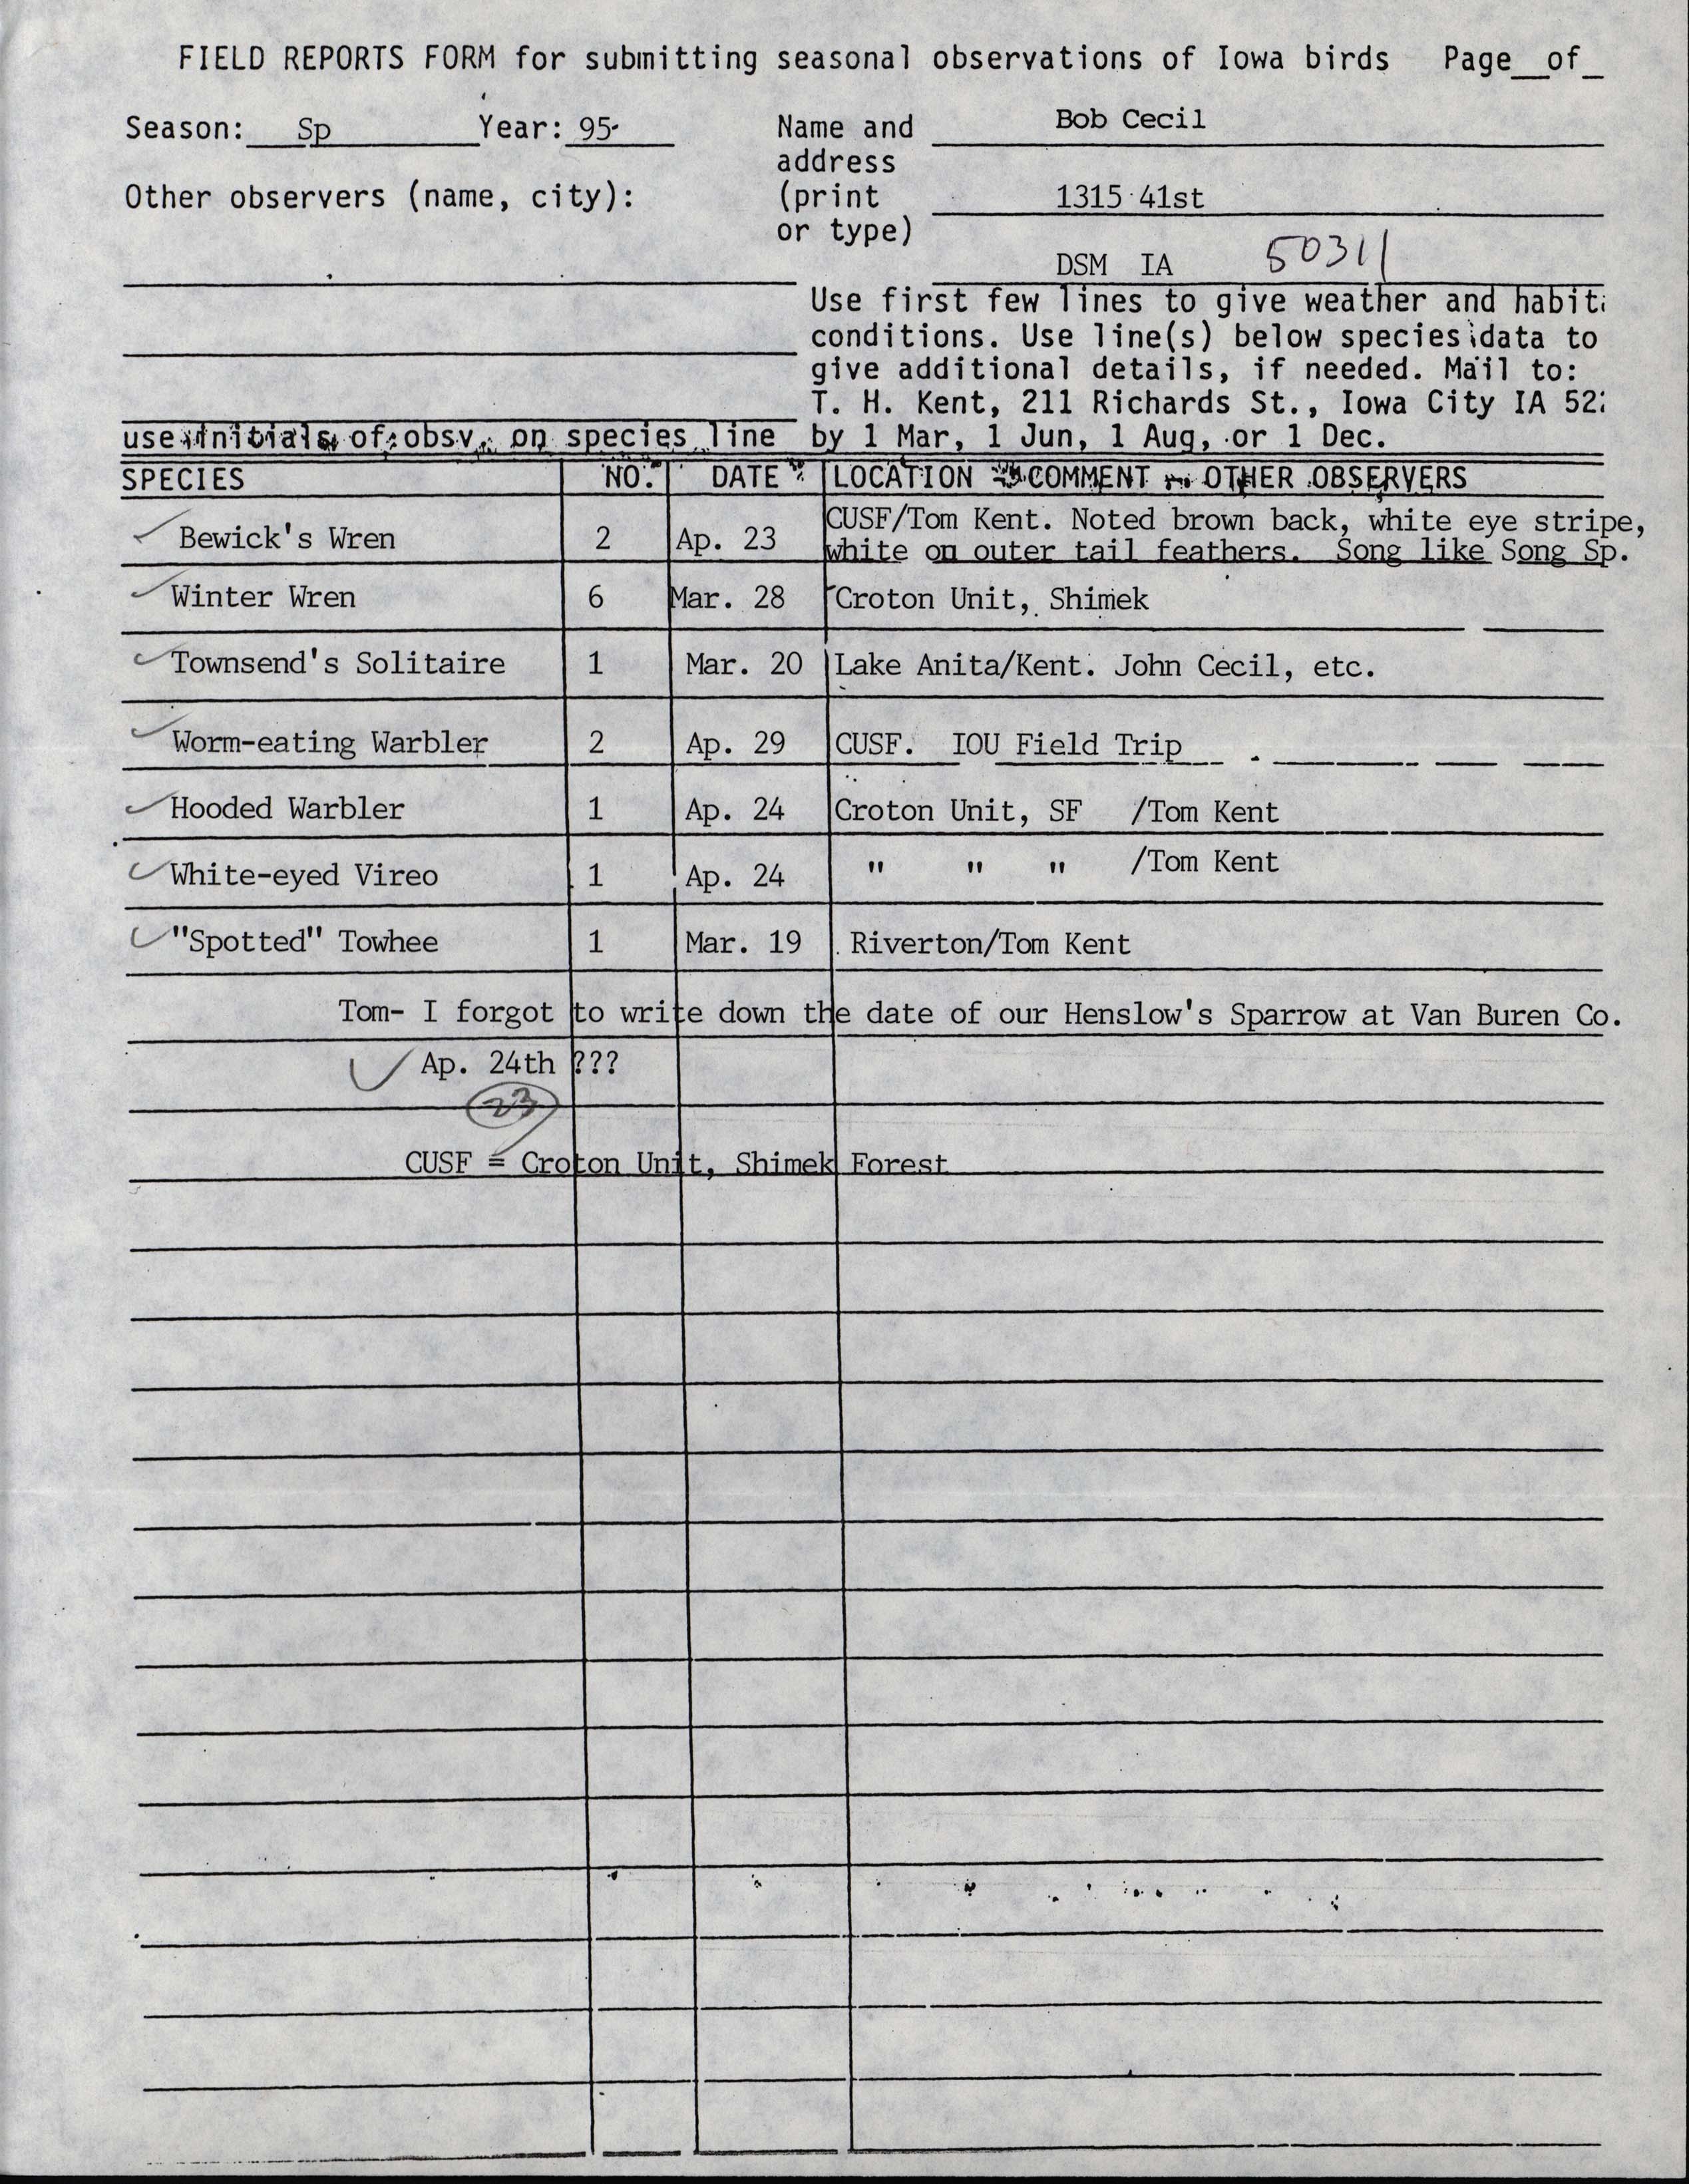 Field reports form for submitting seasonal observations of Iowa birds, spring 1995, Bob Cecil